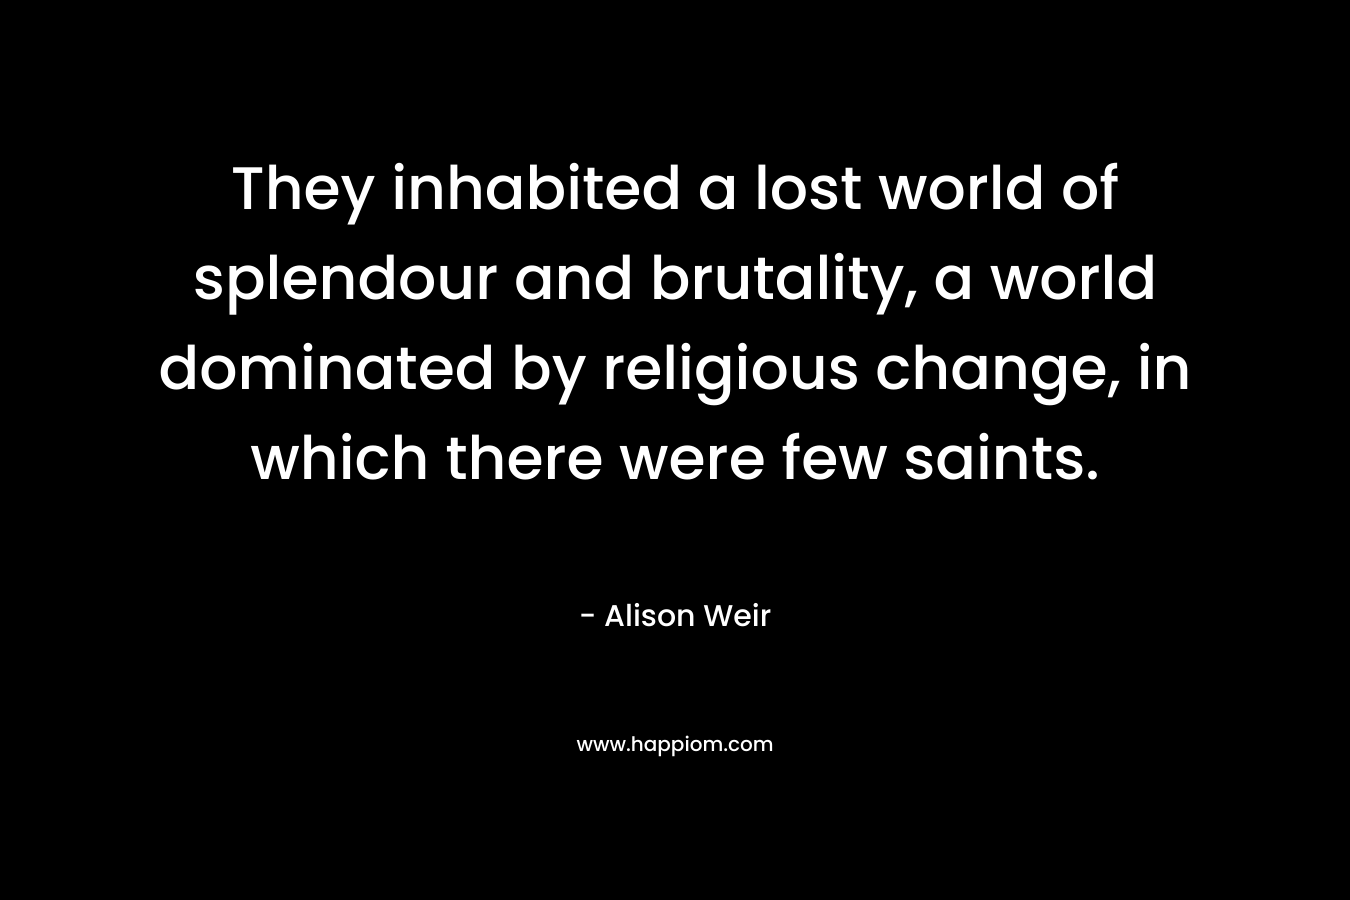 They inhabited a lost world of splendour and brutality, a world dominated by religious change, in which there were few saints. – Alison Weir